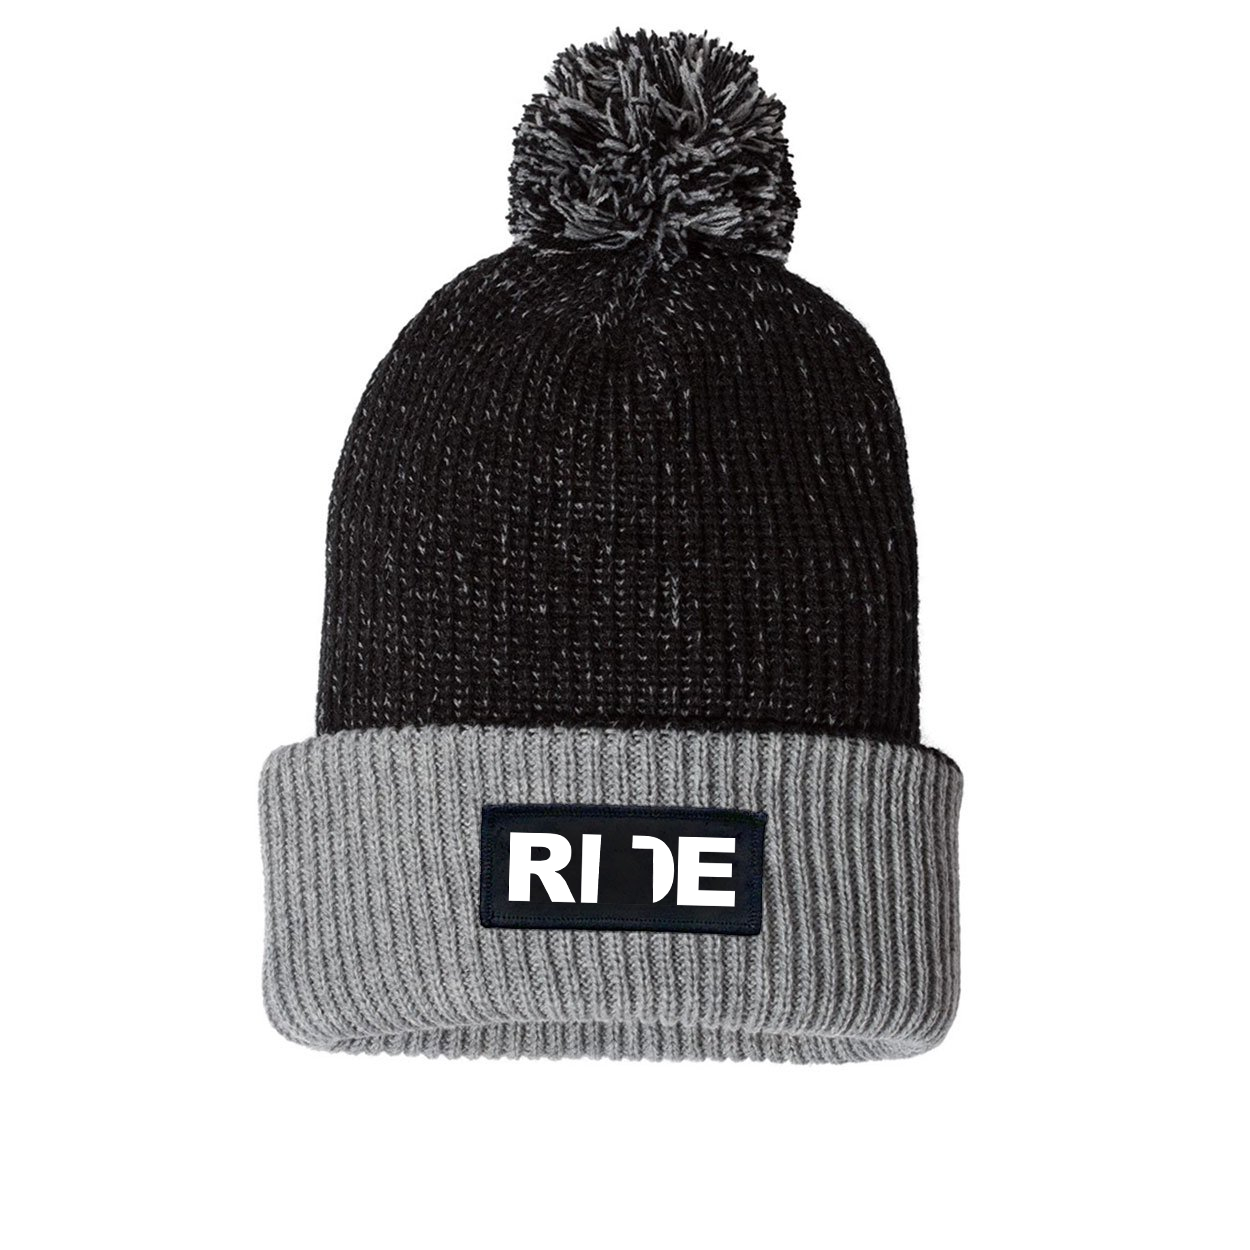 Ride Utah Night Out Woven Patch Roll Up Pom Knit Beanie Black/Gray (White Logo)